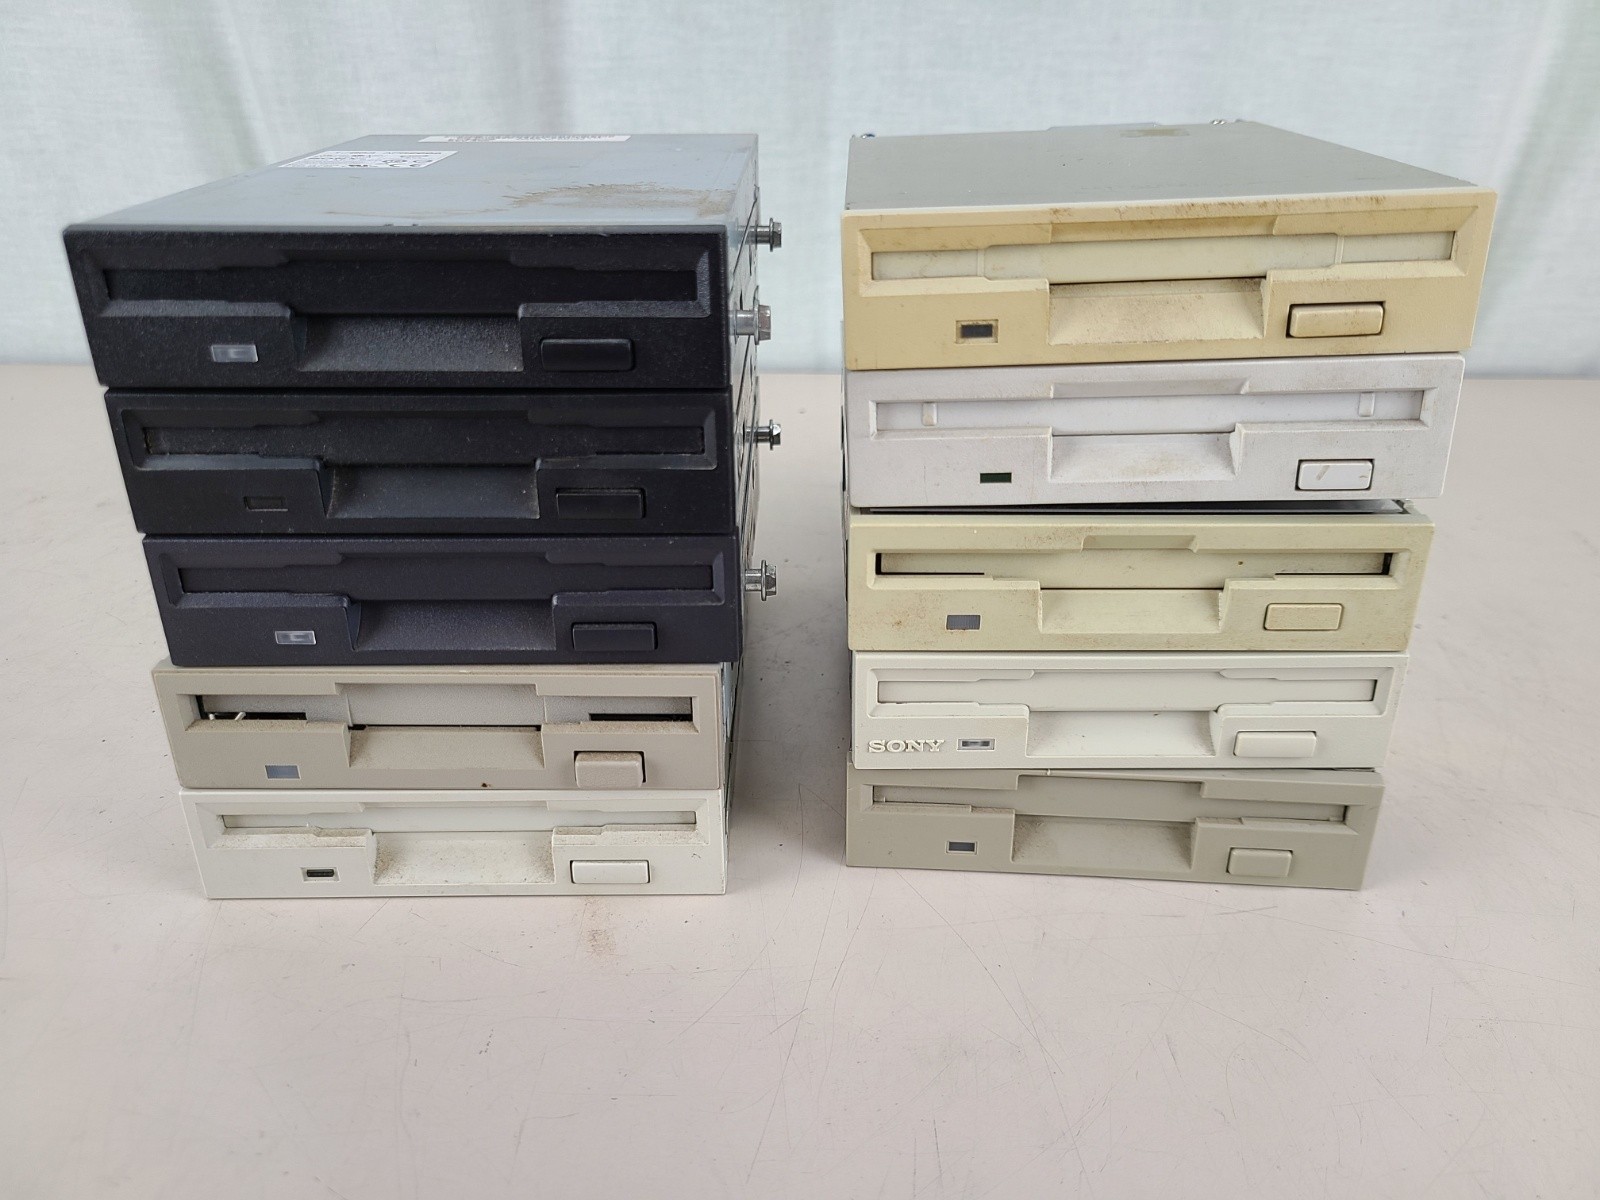 Lot of 10 1.44 Floppy Drives AS IS